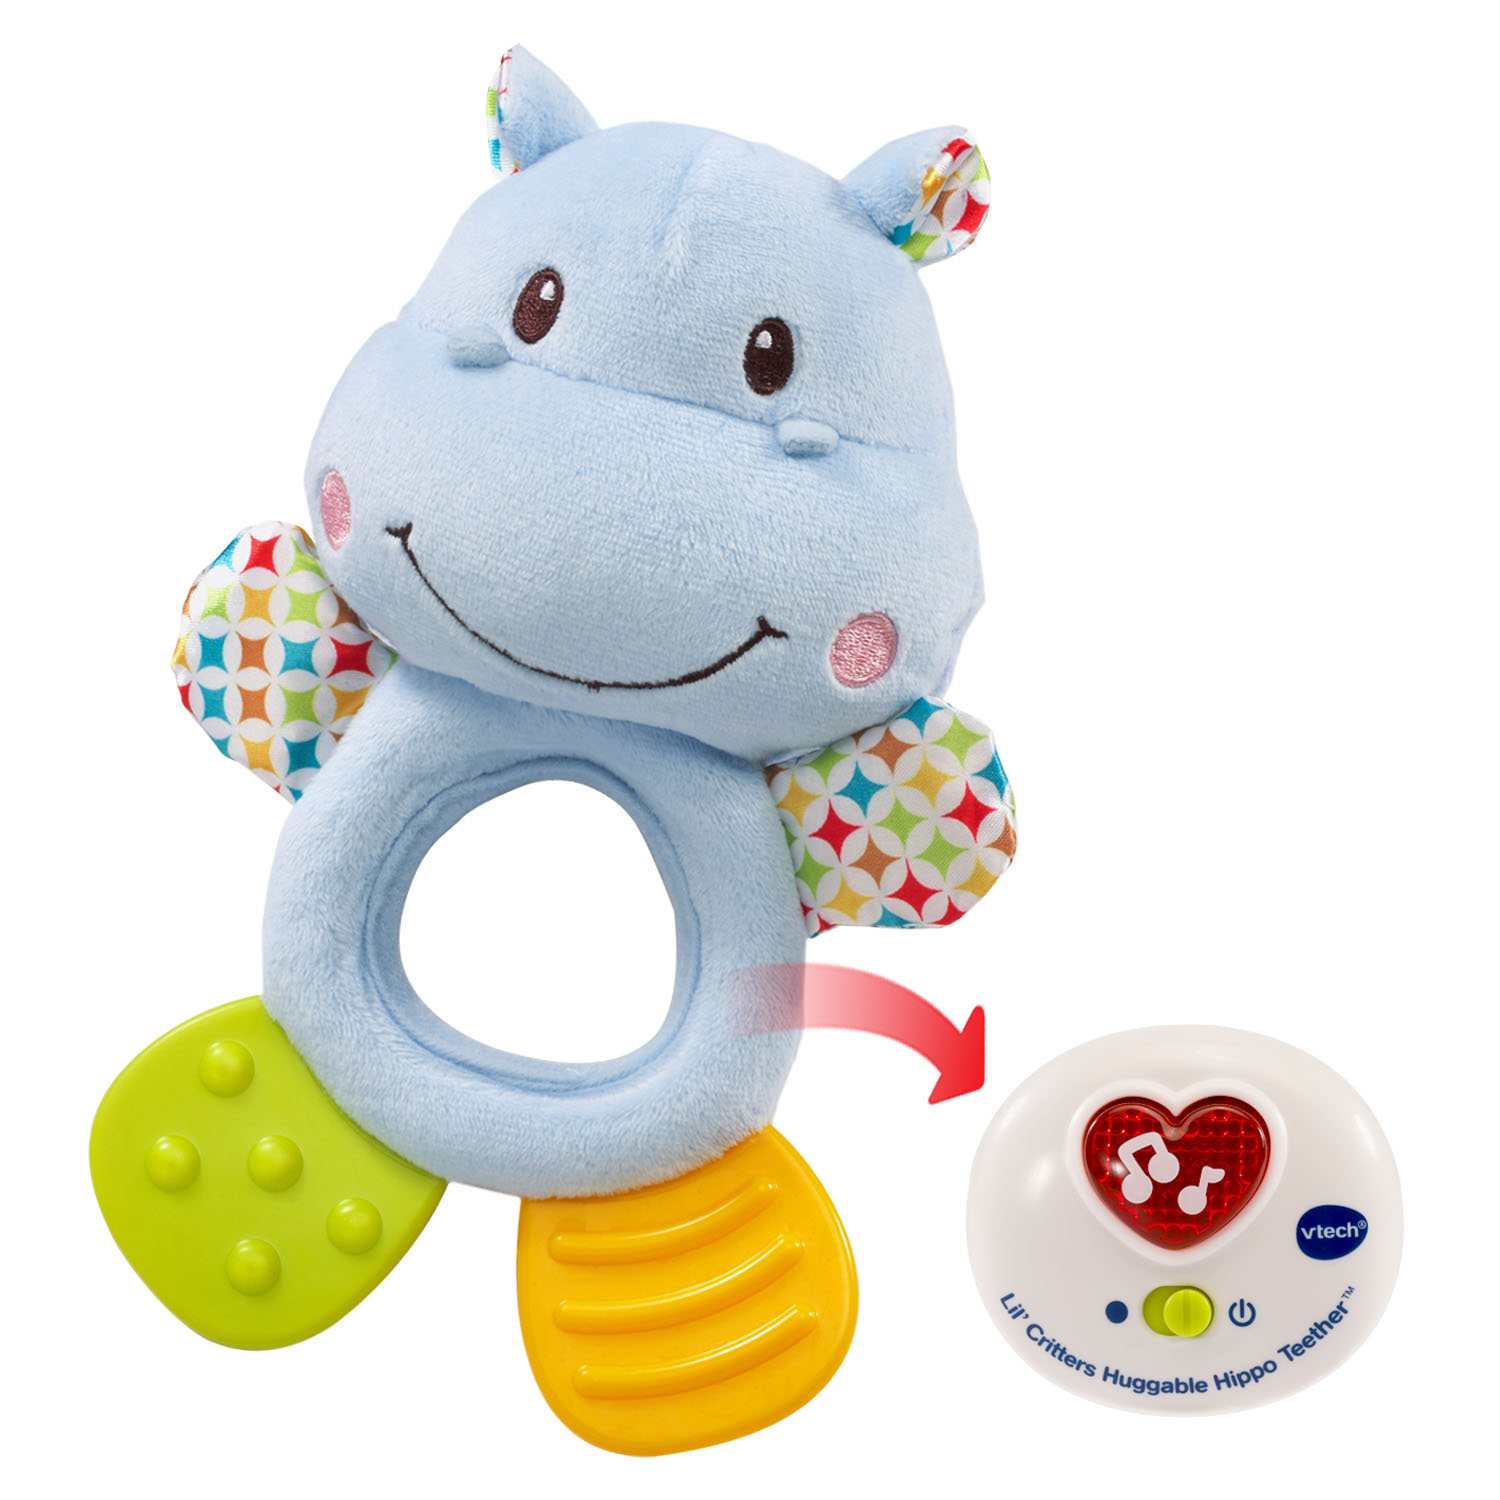 VTech Lil' Critters Huggable Hippo Teether - image 5 of 6